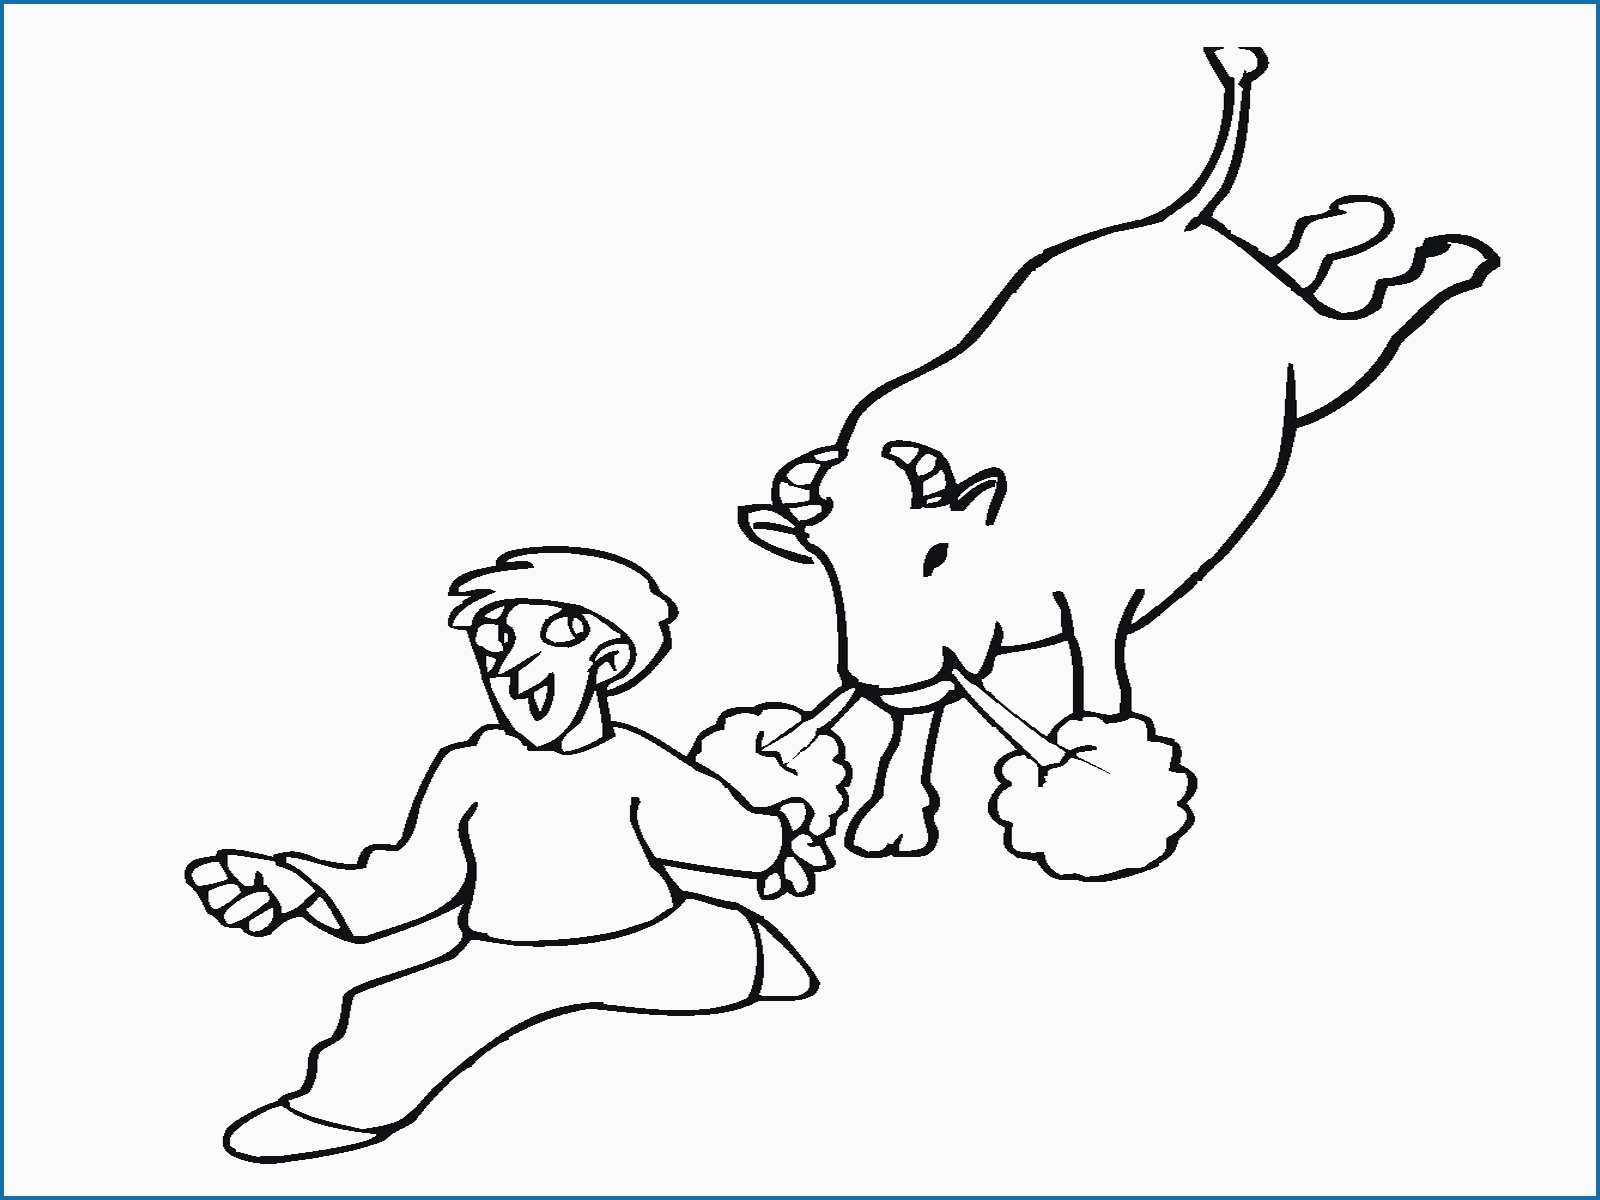 Bull Riding Coloring Pages Coloring Pages Bull Coloring Pages Bull Shark Coloring Pictures